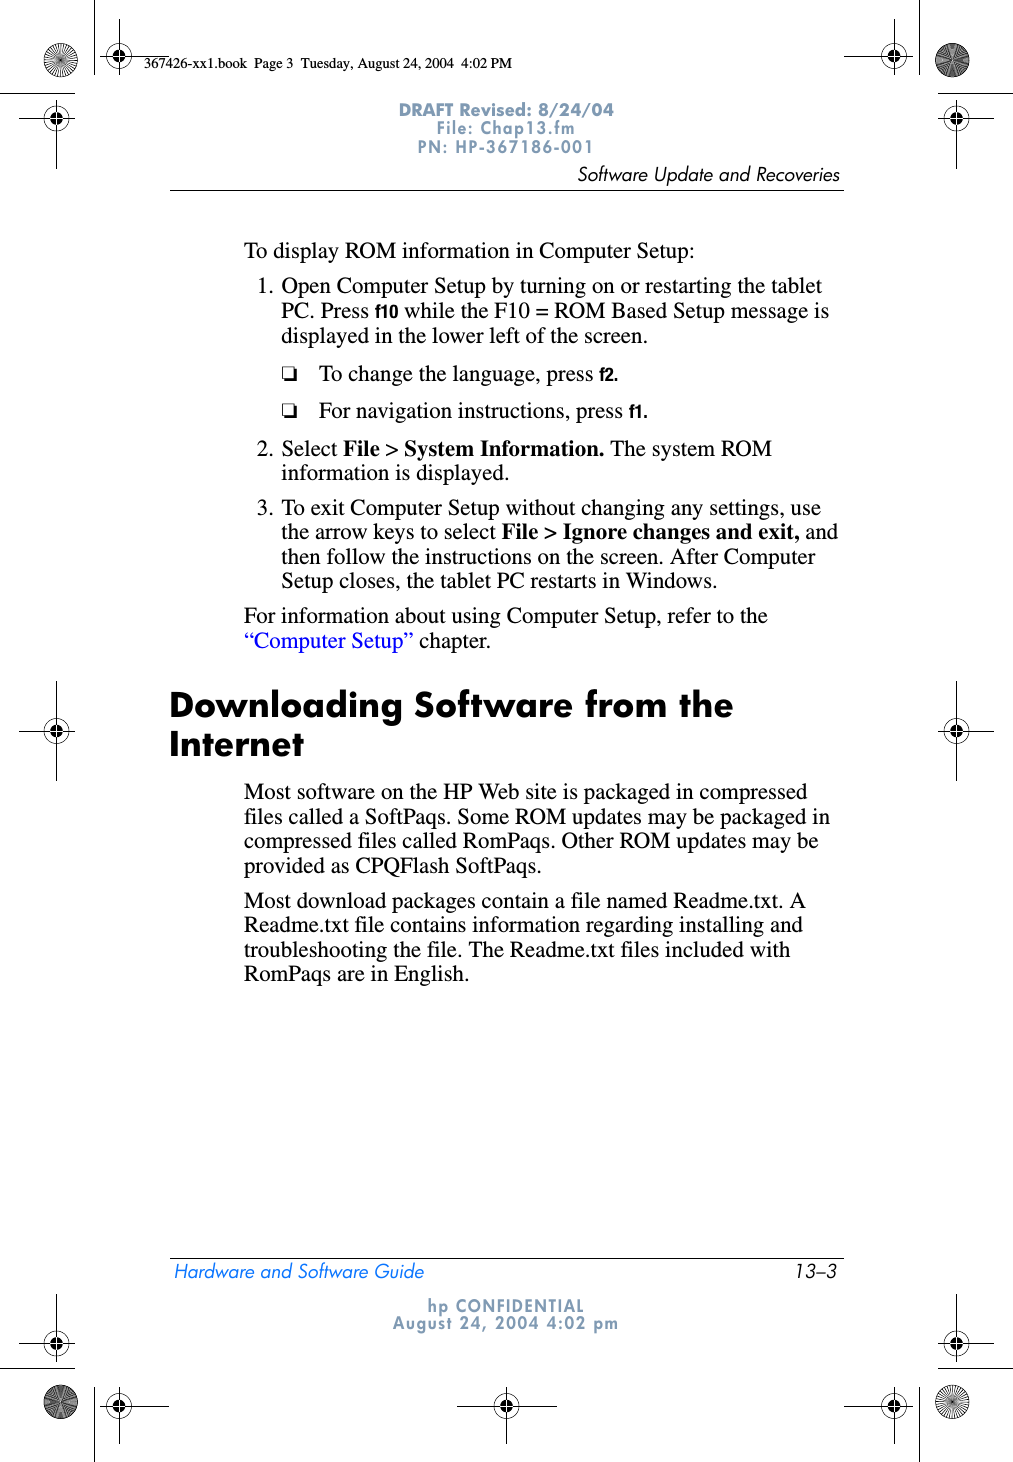 Software Update and RecoveriesHardware and Software Guide 13–3DRAFT Revised: 8/24/04File: Chap13.fm PN: HP-367186-001 hp CONFIDENTIALAugust 24, 2004 4:02 pmTo display ROM information in Computer Setup:1. Open Computer Setup by turning on or restarting the tablet PC. Press f10 while the F10 = ROM Based Setup message is displayed in the lower left of the screen.❏To change the language, press f2.❏For navigation instructions, press f1.2. Select File &gt; System Information. The system ROM information is displayed.3. To exit Computer Setup without changing any settings, use the arrow keys to select File &gt; Ignore changes and exit, and then follow the instructions on the screen. After Computer Setup closes, the tablet PC restarts in Windows.For information about using Computer Setup, refer to the “Computer Setup” chapter.Downloading Software from the InternetMost software on the HP Web site is packaged in compressed files called a SoftPaqs. Some ROM updates may be packaged in compressed files called RomPaqs. Other ROM updates may be provided as CPQFlash SoftPaqs.Most download packages contain a file named Readme.txt. A Readme.txt file contains information regarding installing and troubleshooting the file. The Readme.txt files included with RomPaqs are in English.367426-xx1.book  Page 3  Tuesday, August 24, 2004  4:02 PM